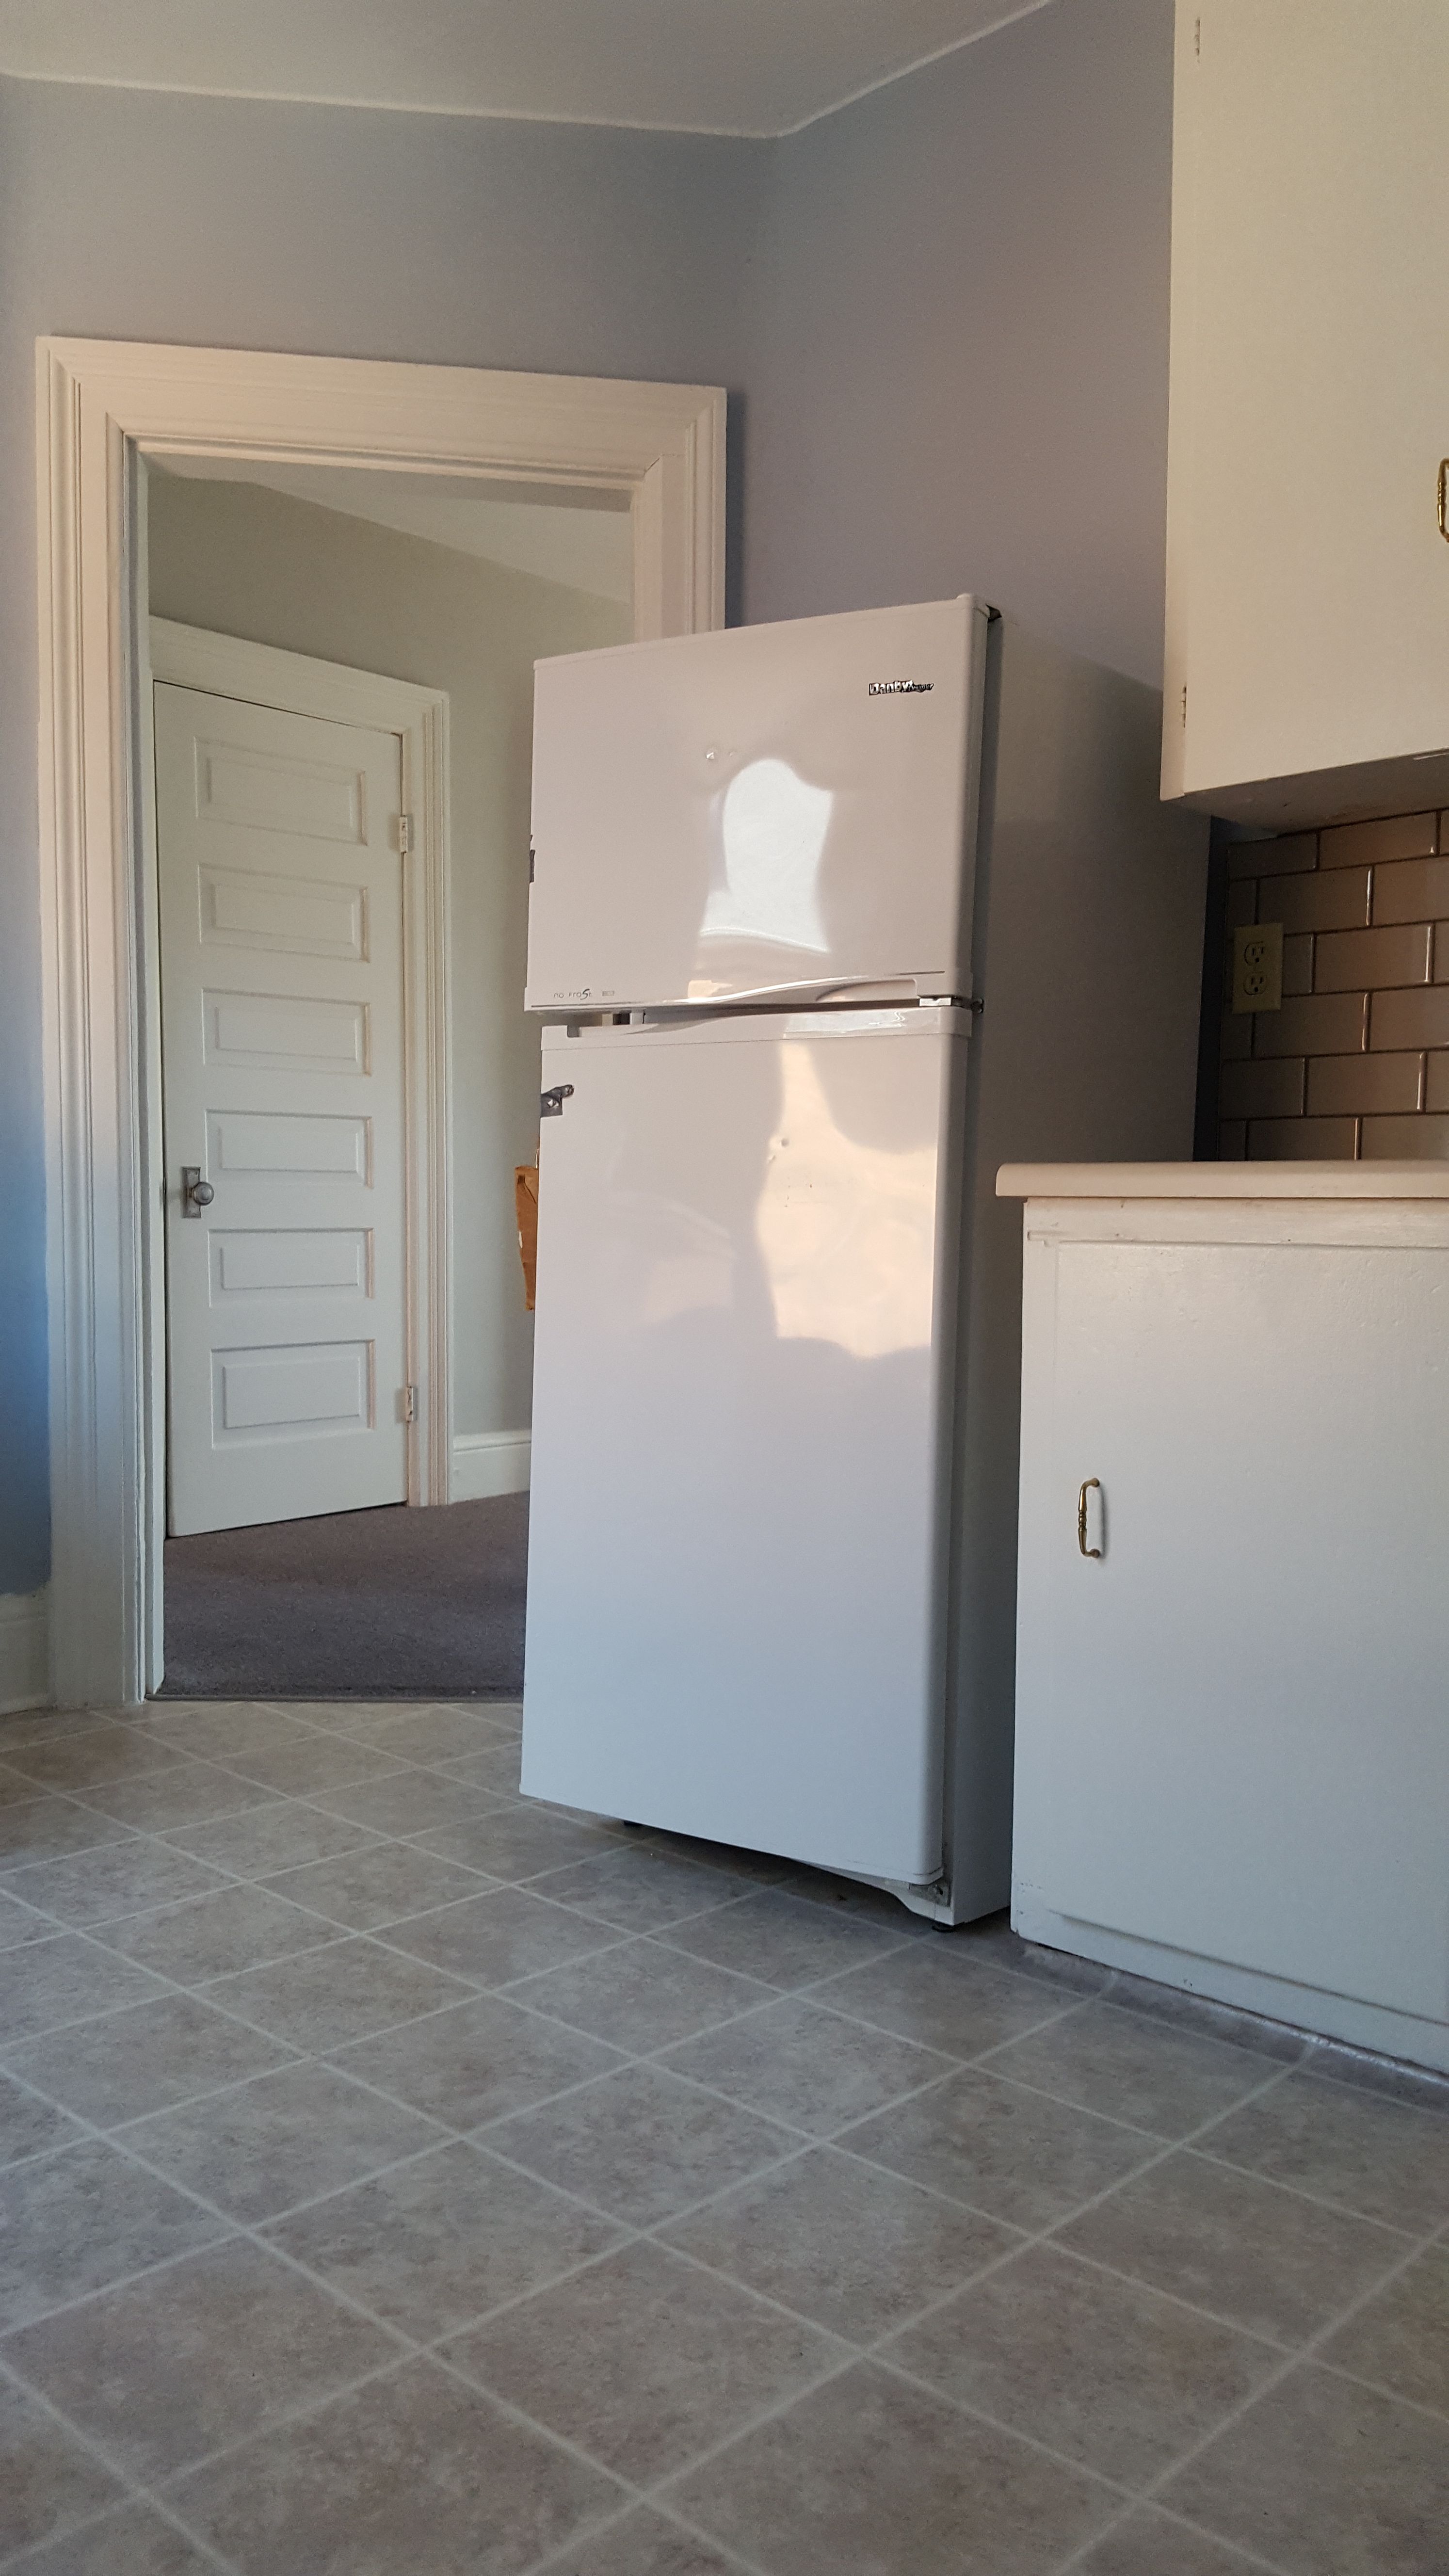 Rental Units and Courtesy Appliances